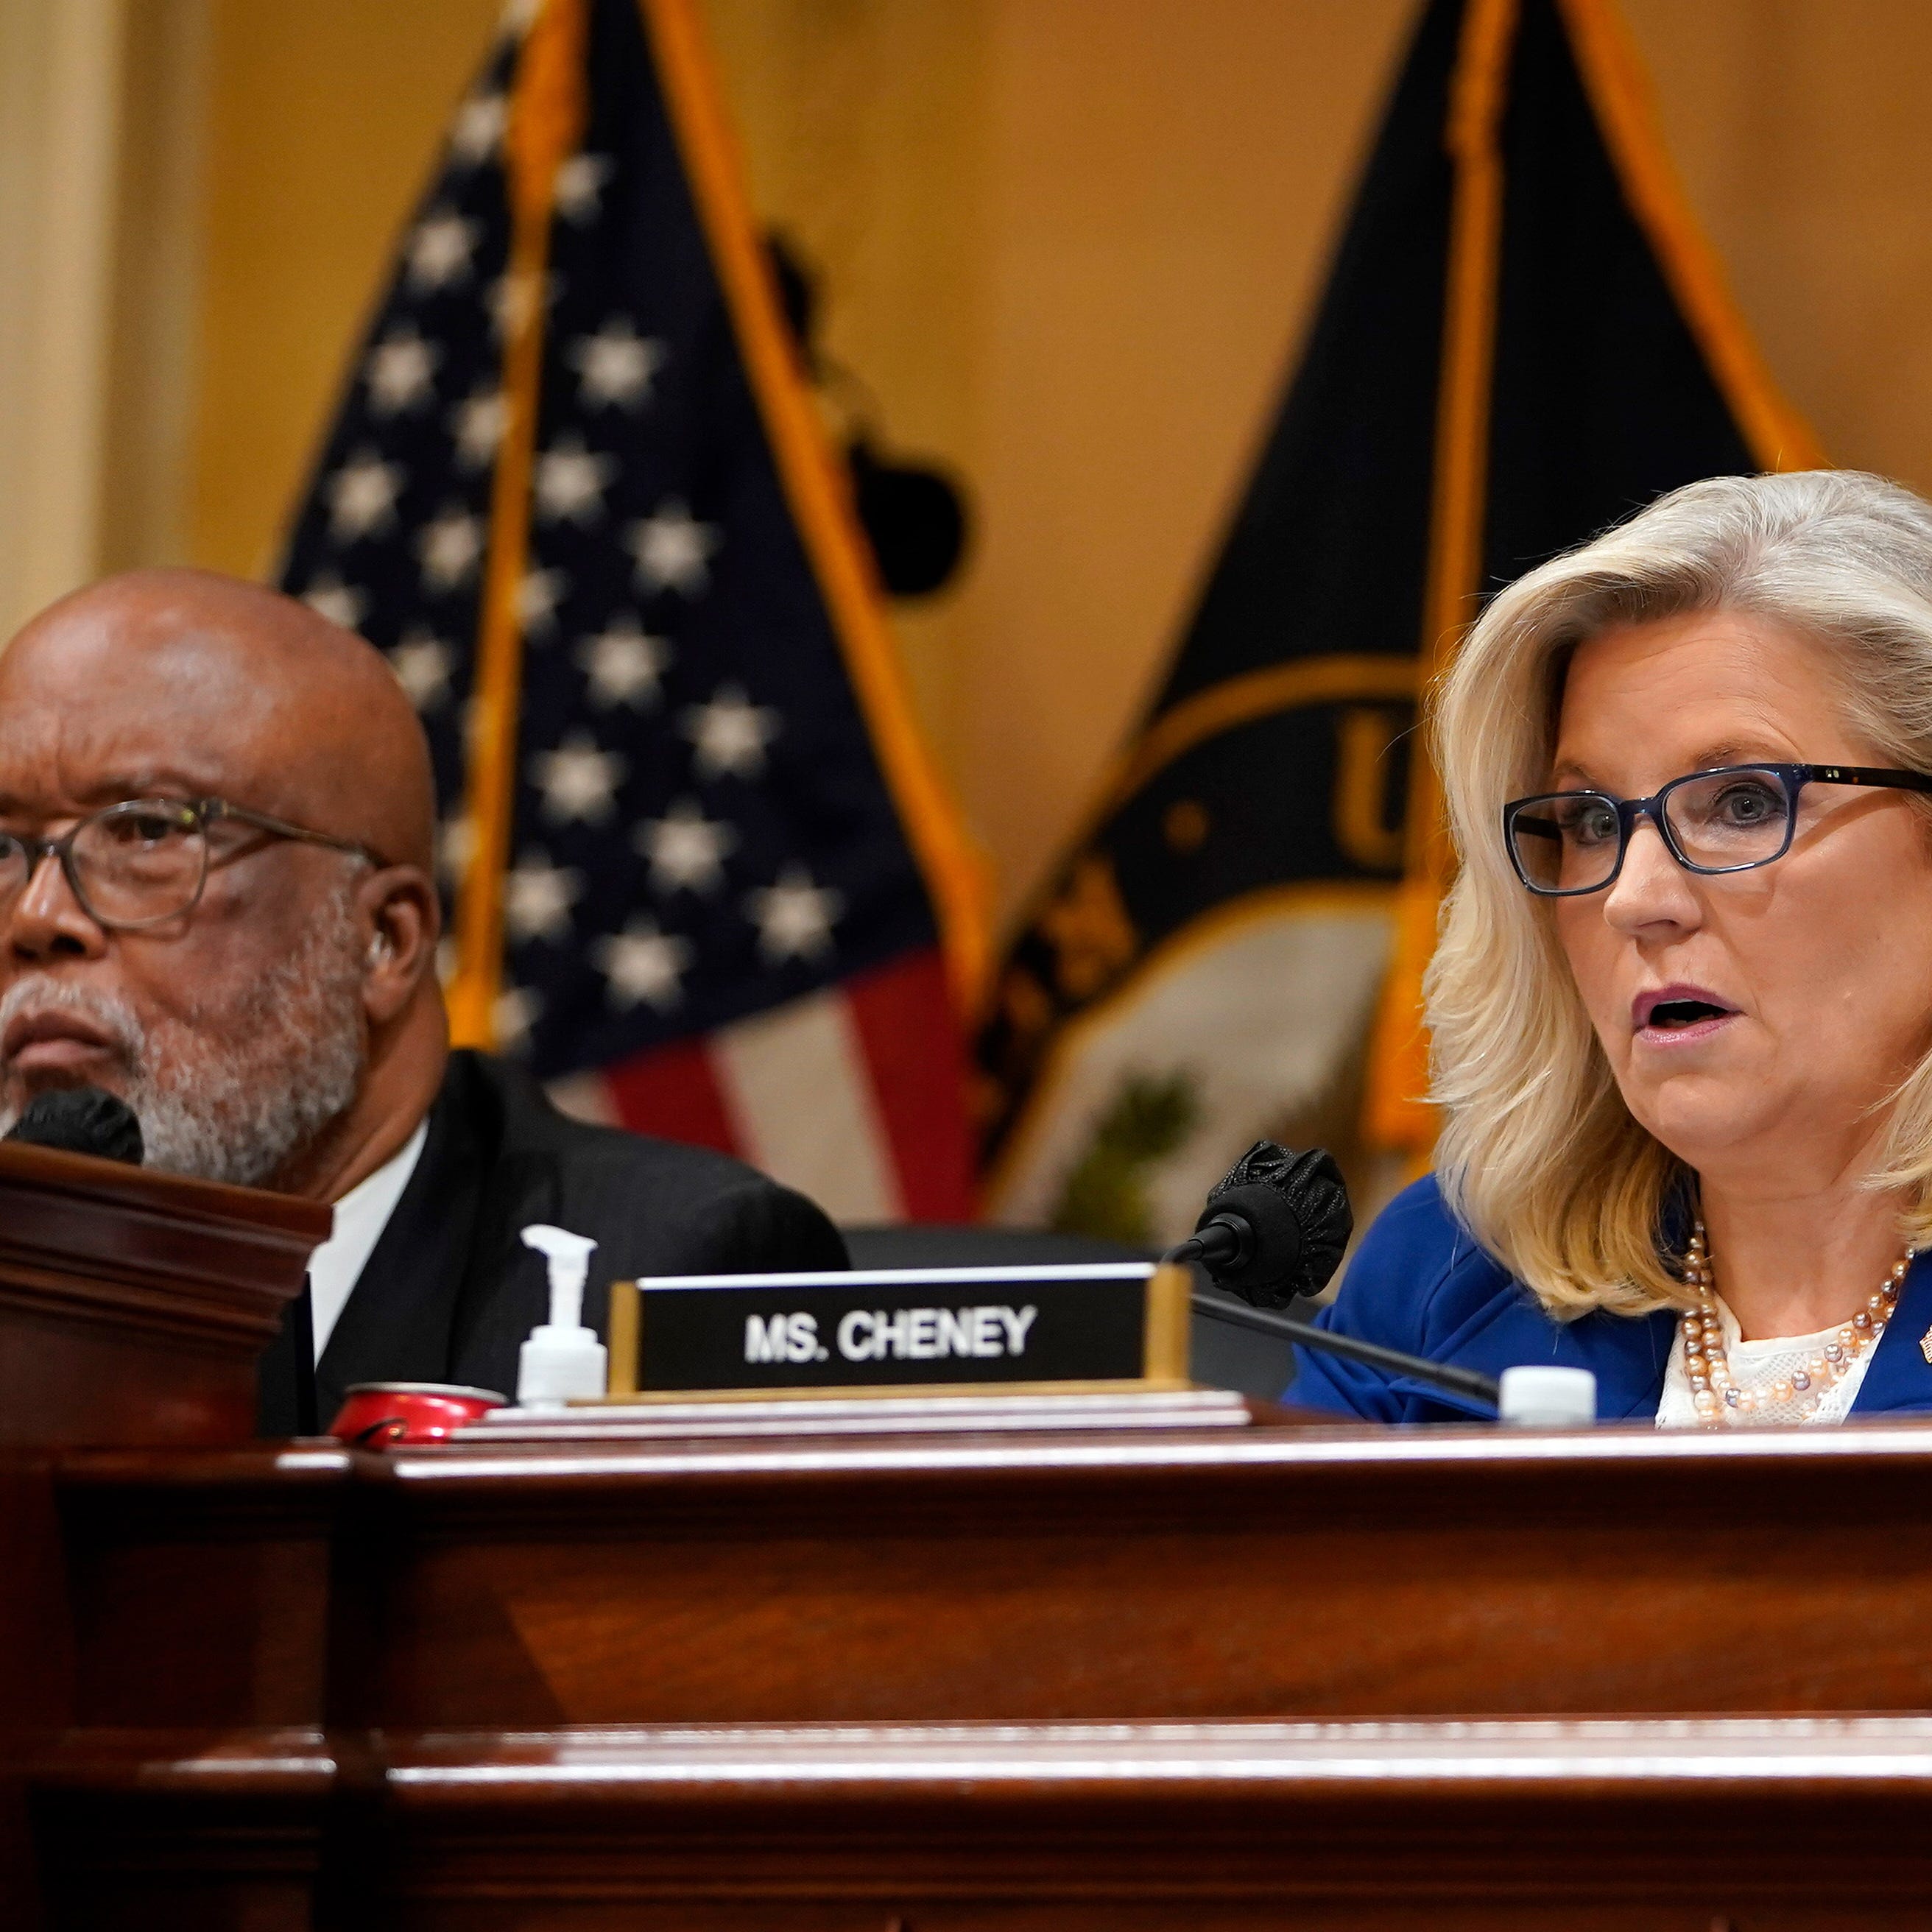 Rep. Liz Cheney, R-Wyo, making a motion to subpoena former President Trump during the hearing. The committee to investigate the January 6 attack on the United States Capitol resumes public hearings at the US Capitol on Oct. 13, 2022 in Washington DC.